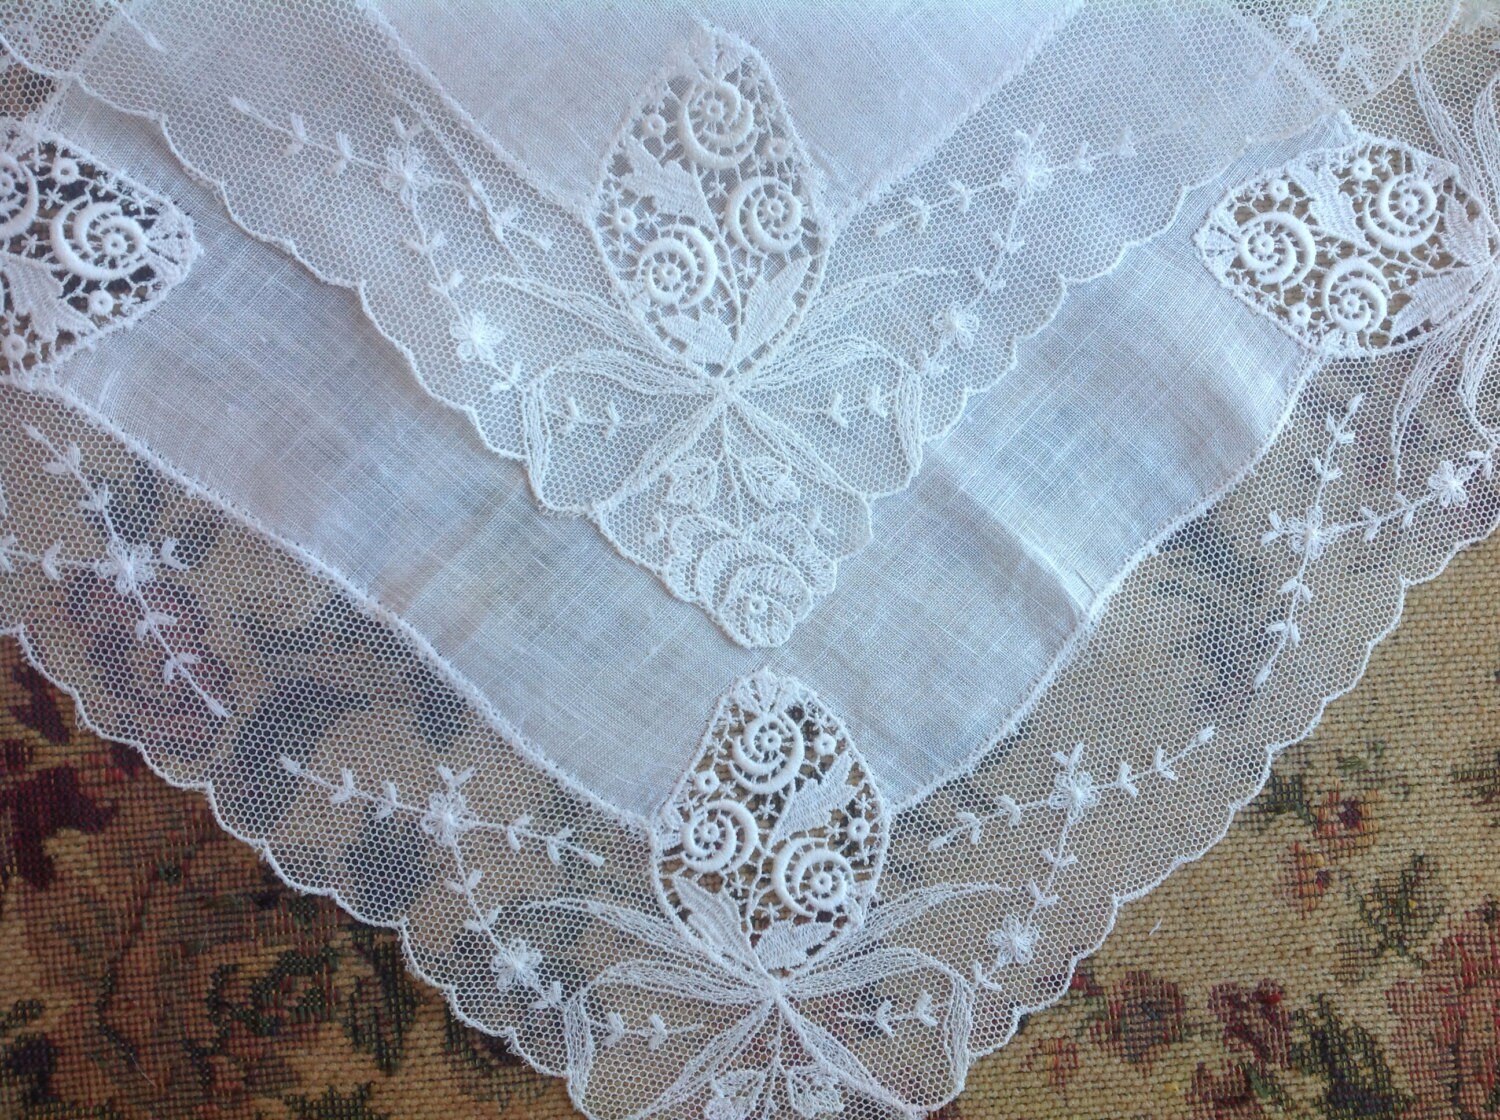 VINTAGE LACE HANDKERCHIEF. Lace Embroidered Net Lace.